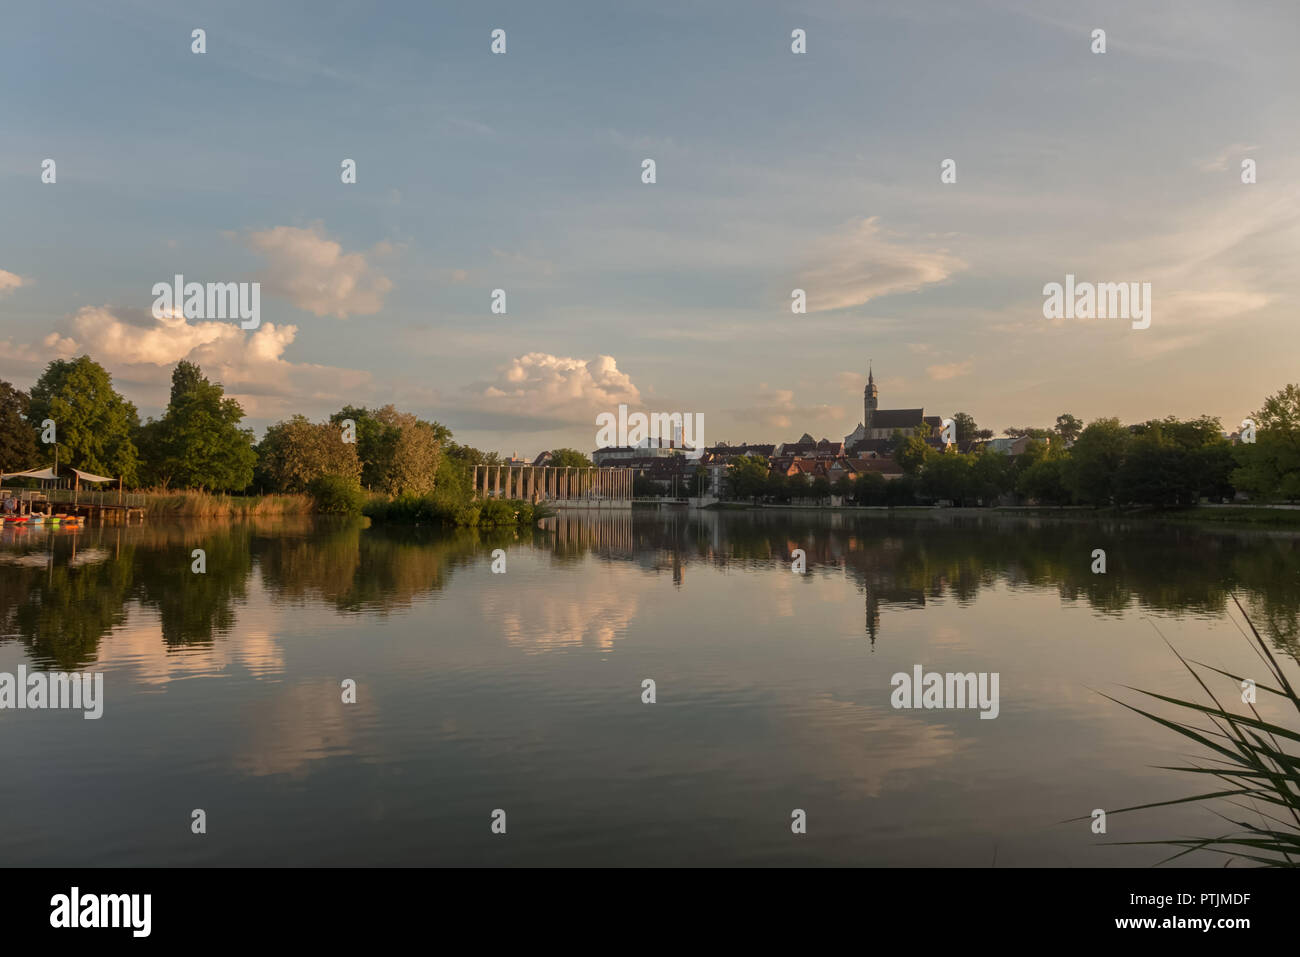 A lake in a public park of a German town Stock Photo